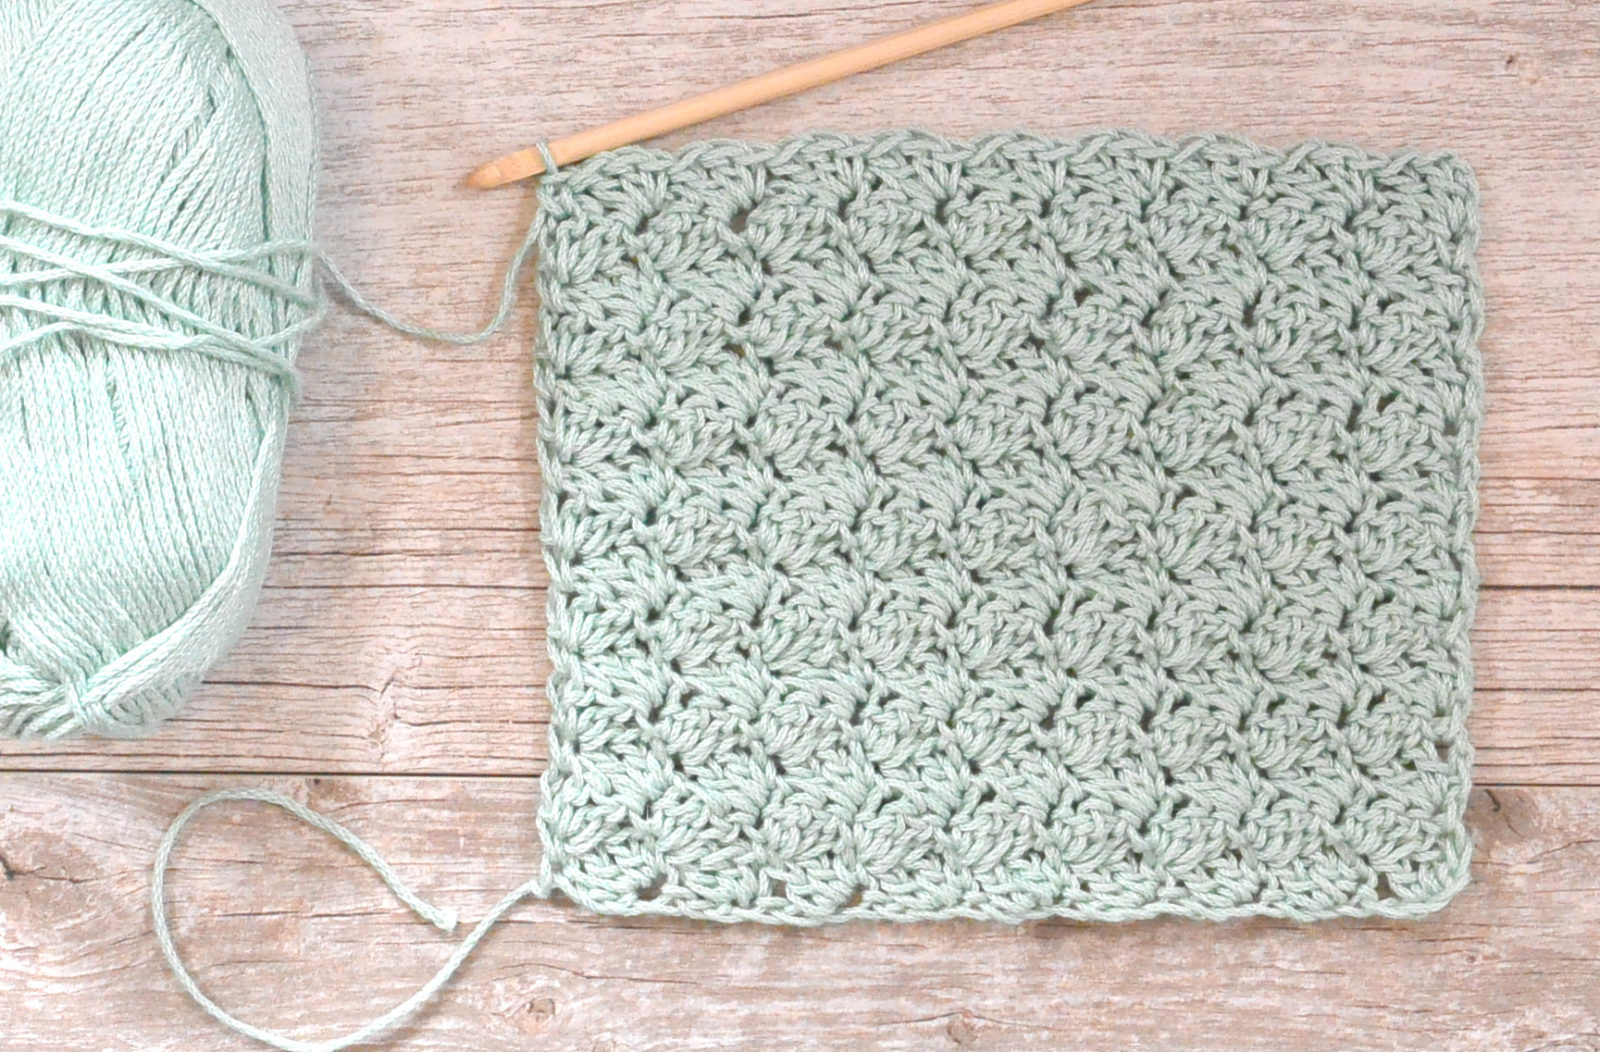 How To Crochet The Blanket Stitch Mama In A Stitch